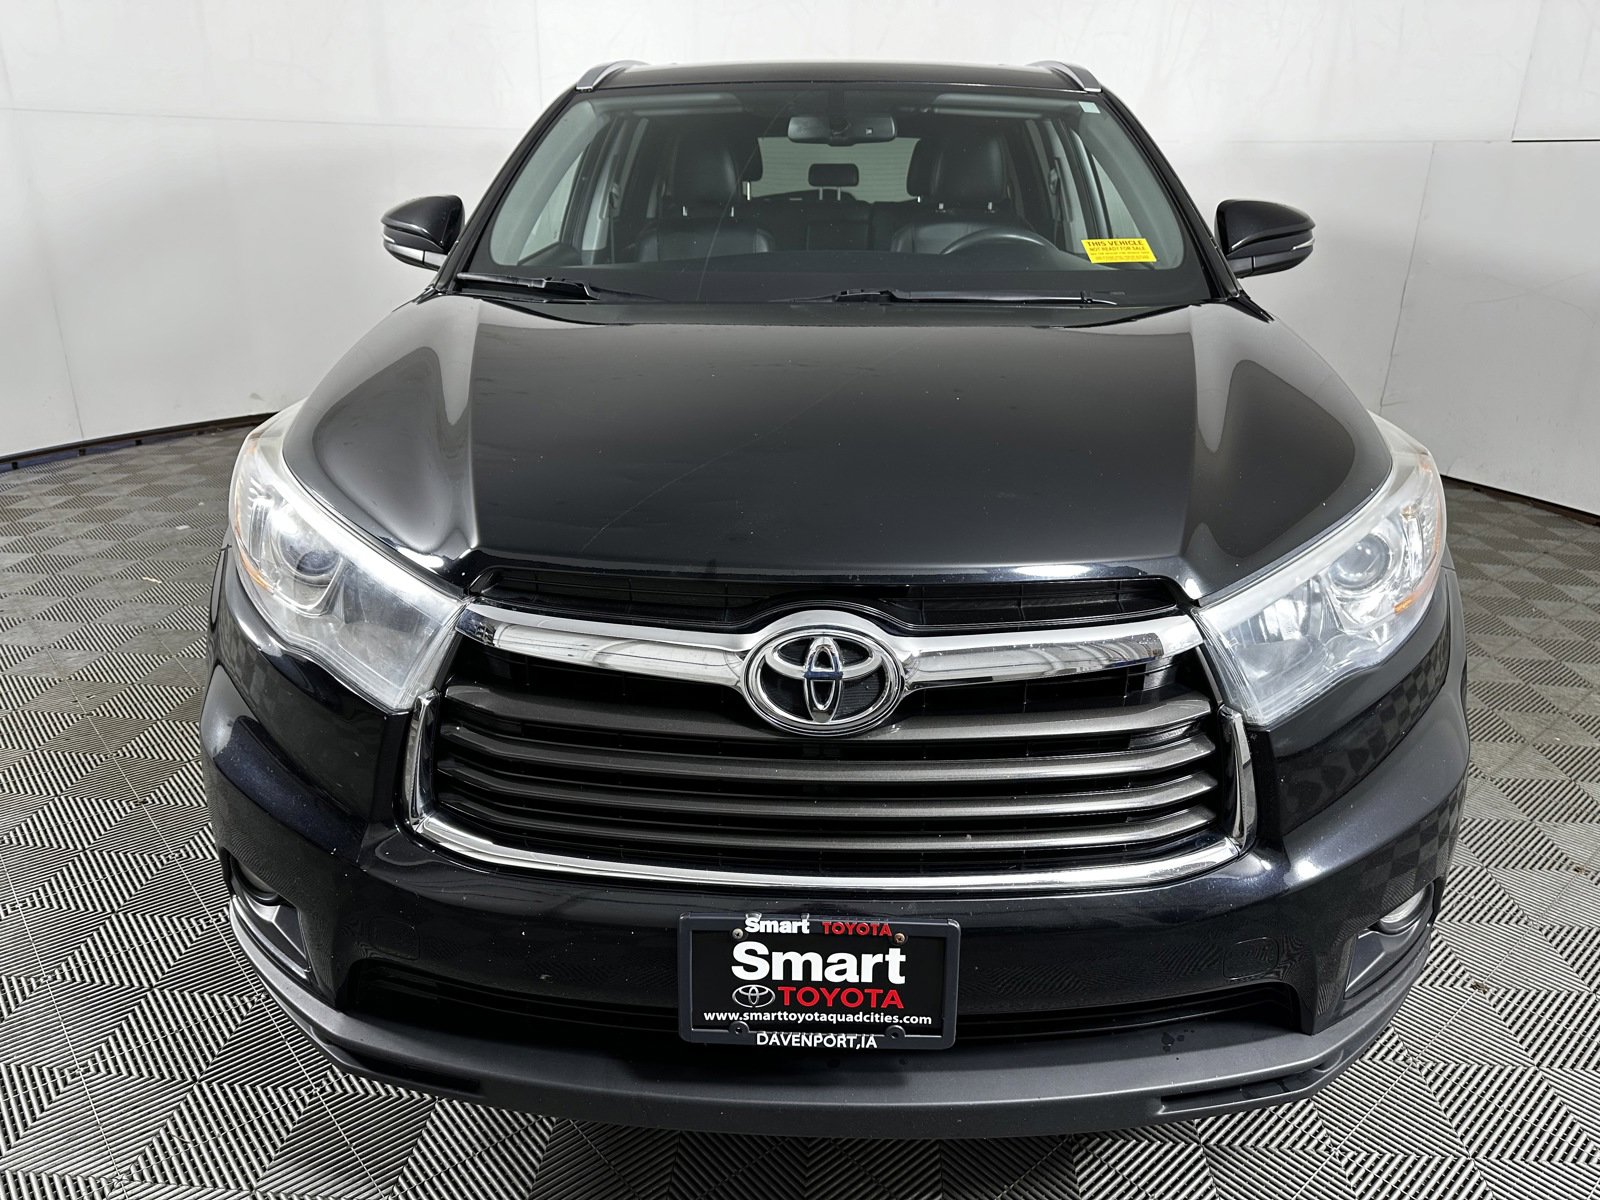 Used 2016 Toyota Highlander XLE with VIN 5TDJKRFH4GS326116 for sale in Davenport, IA